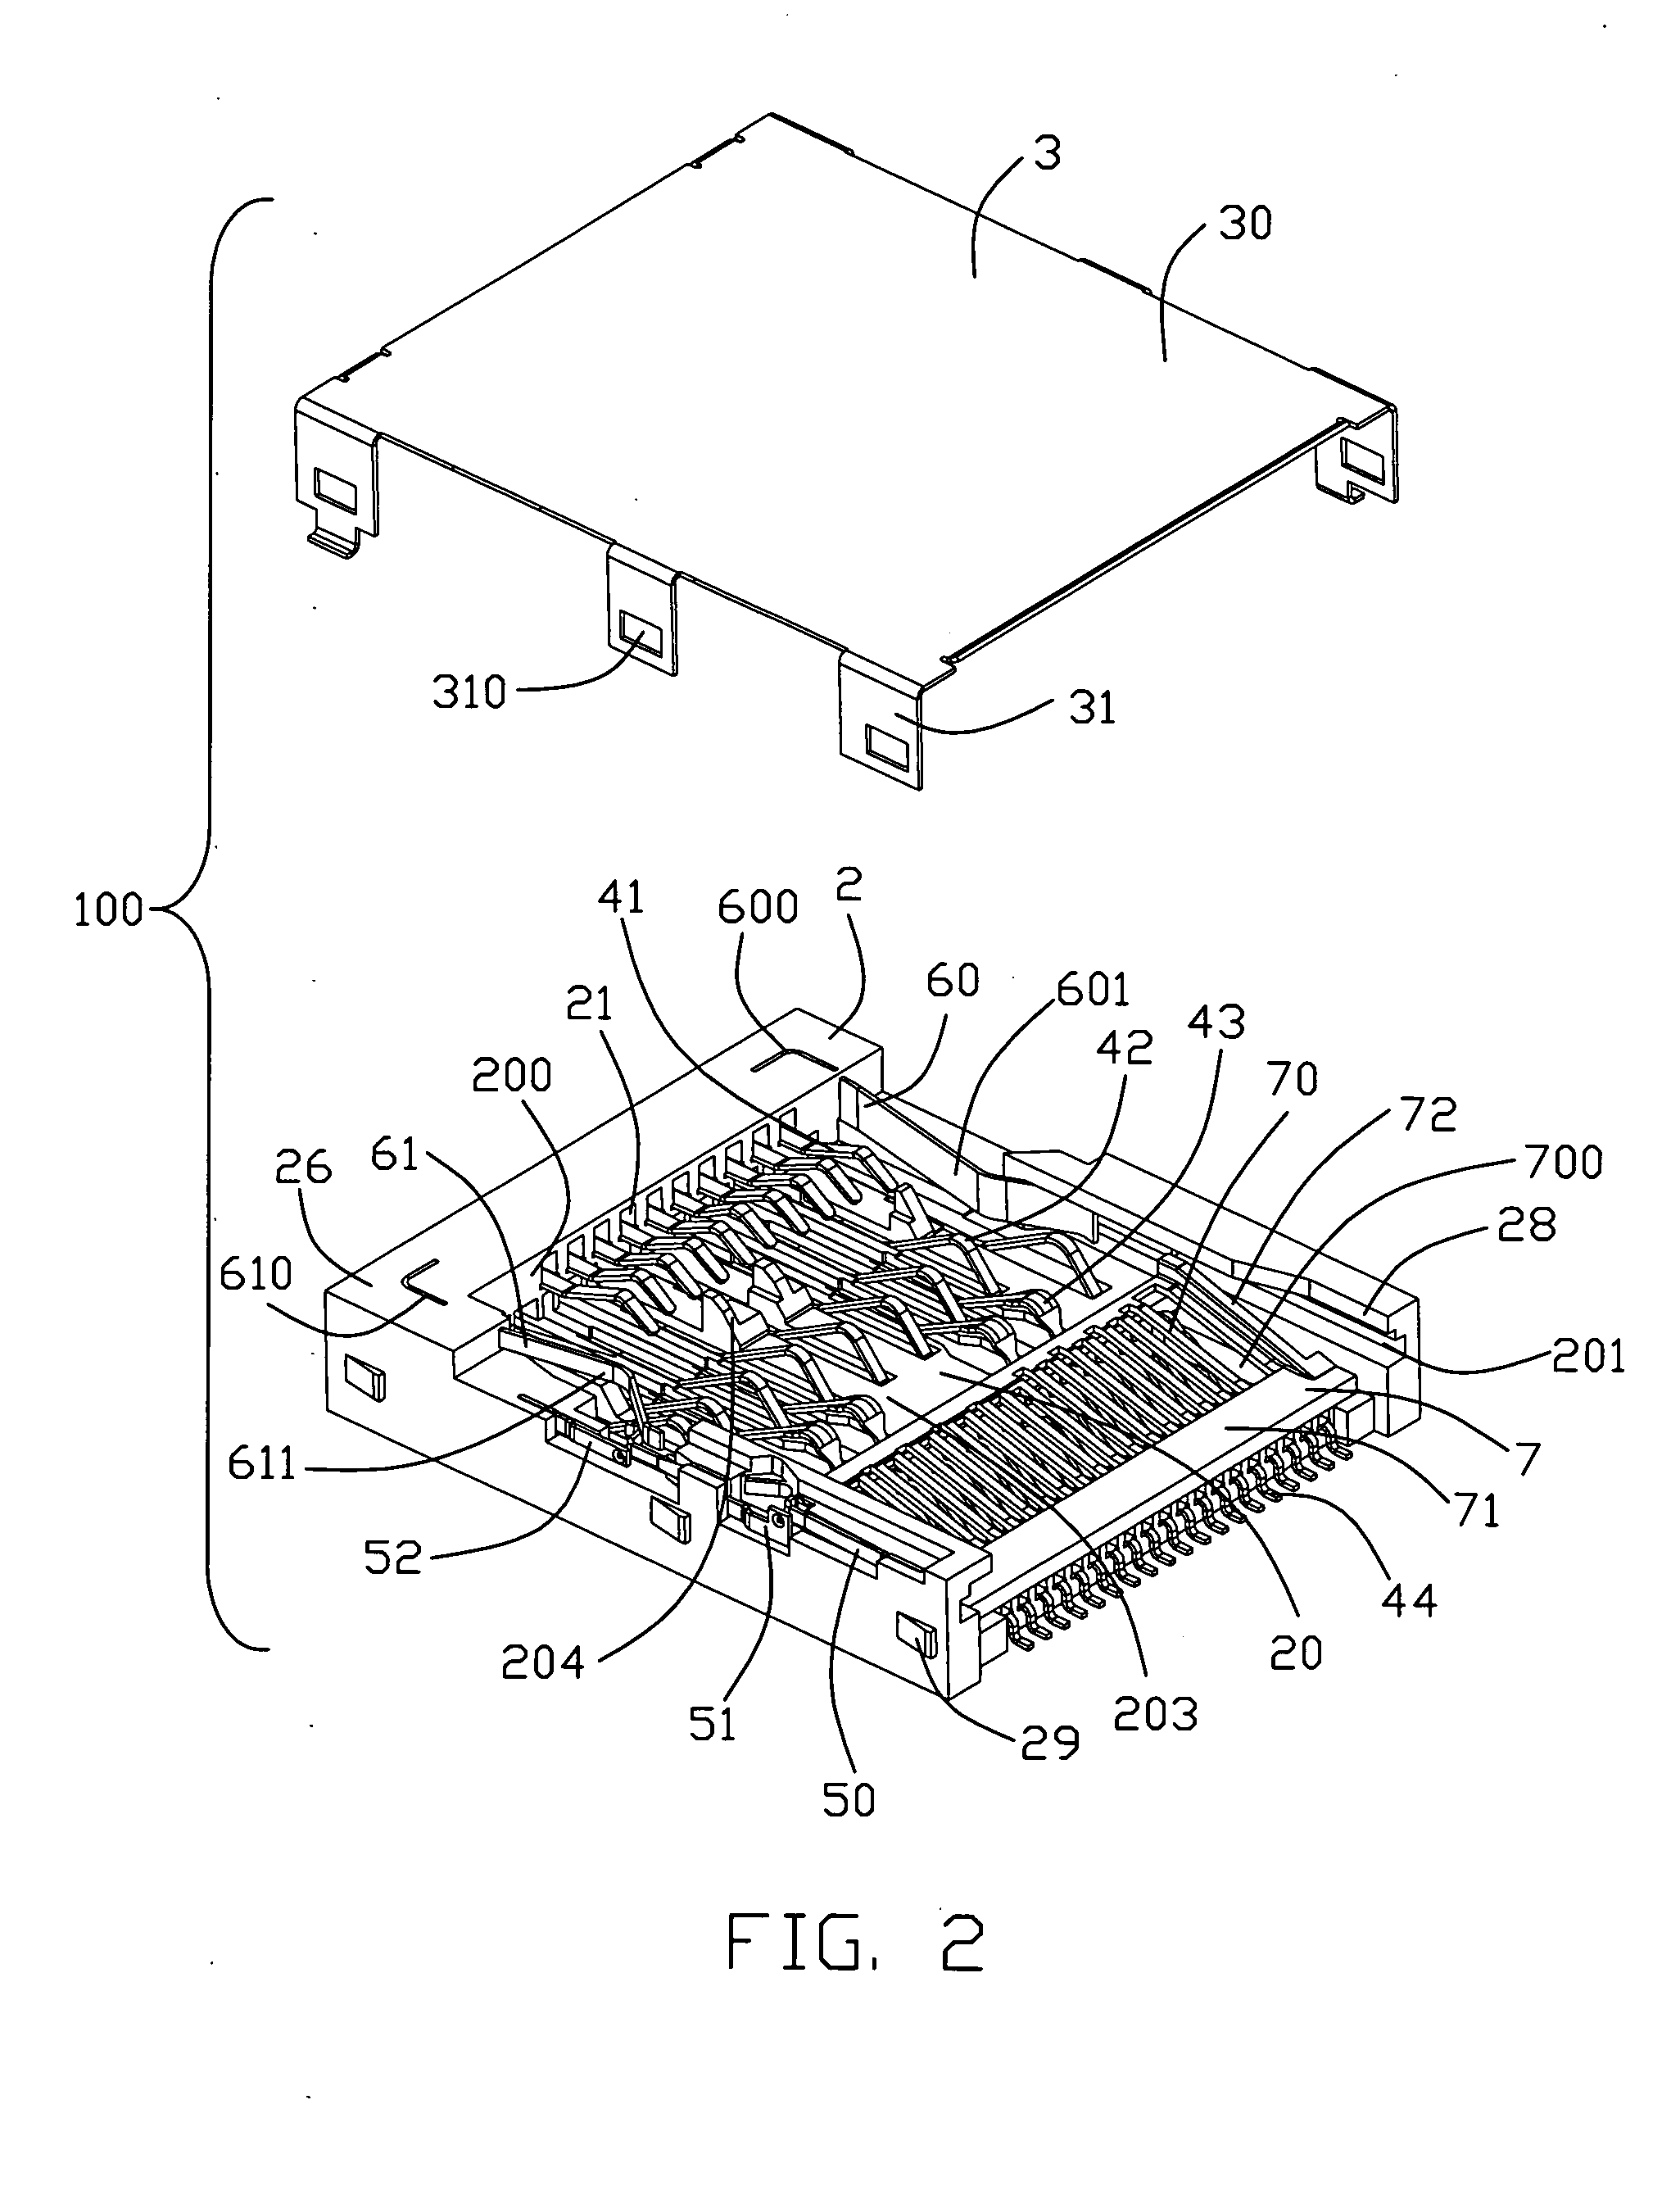 Electrical card connector with improved card restriction structure